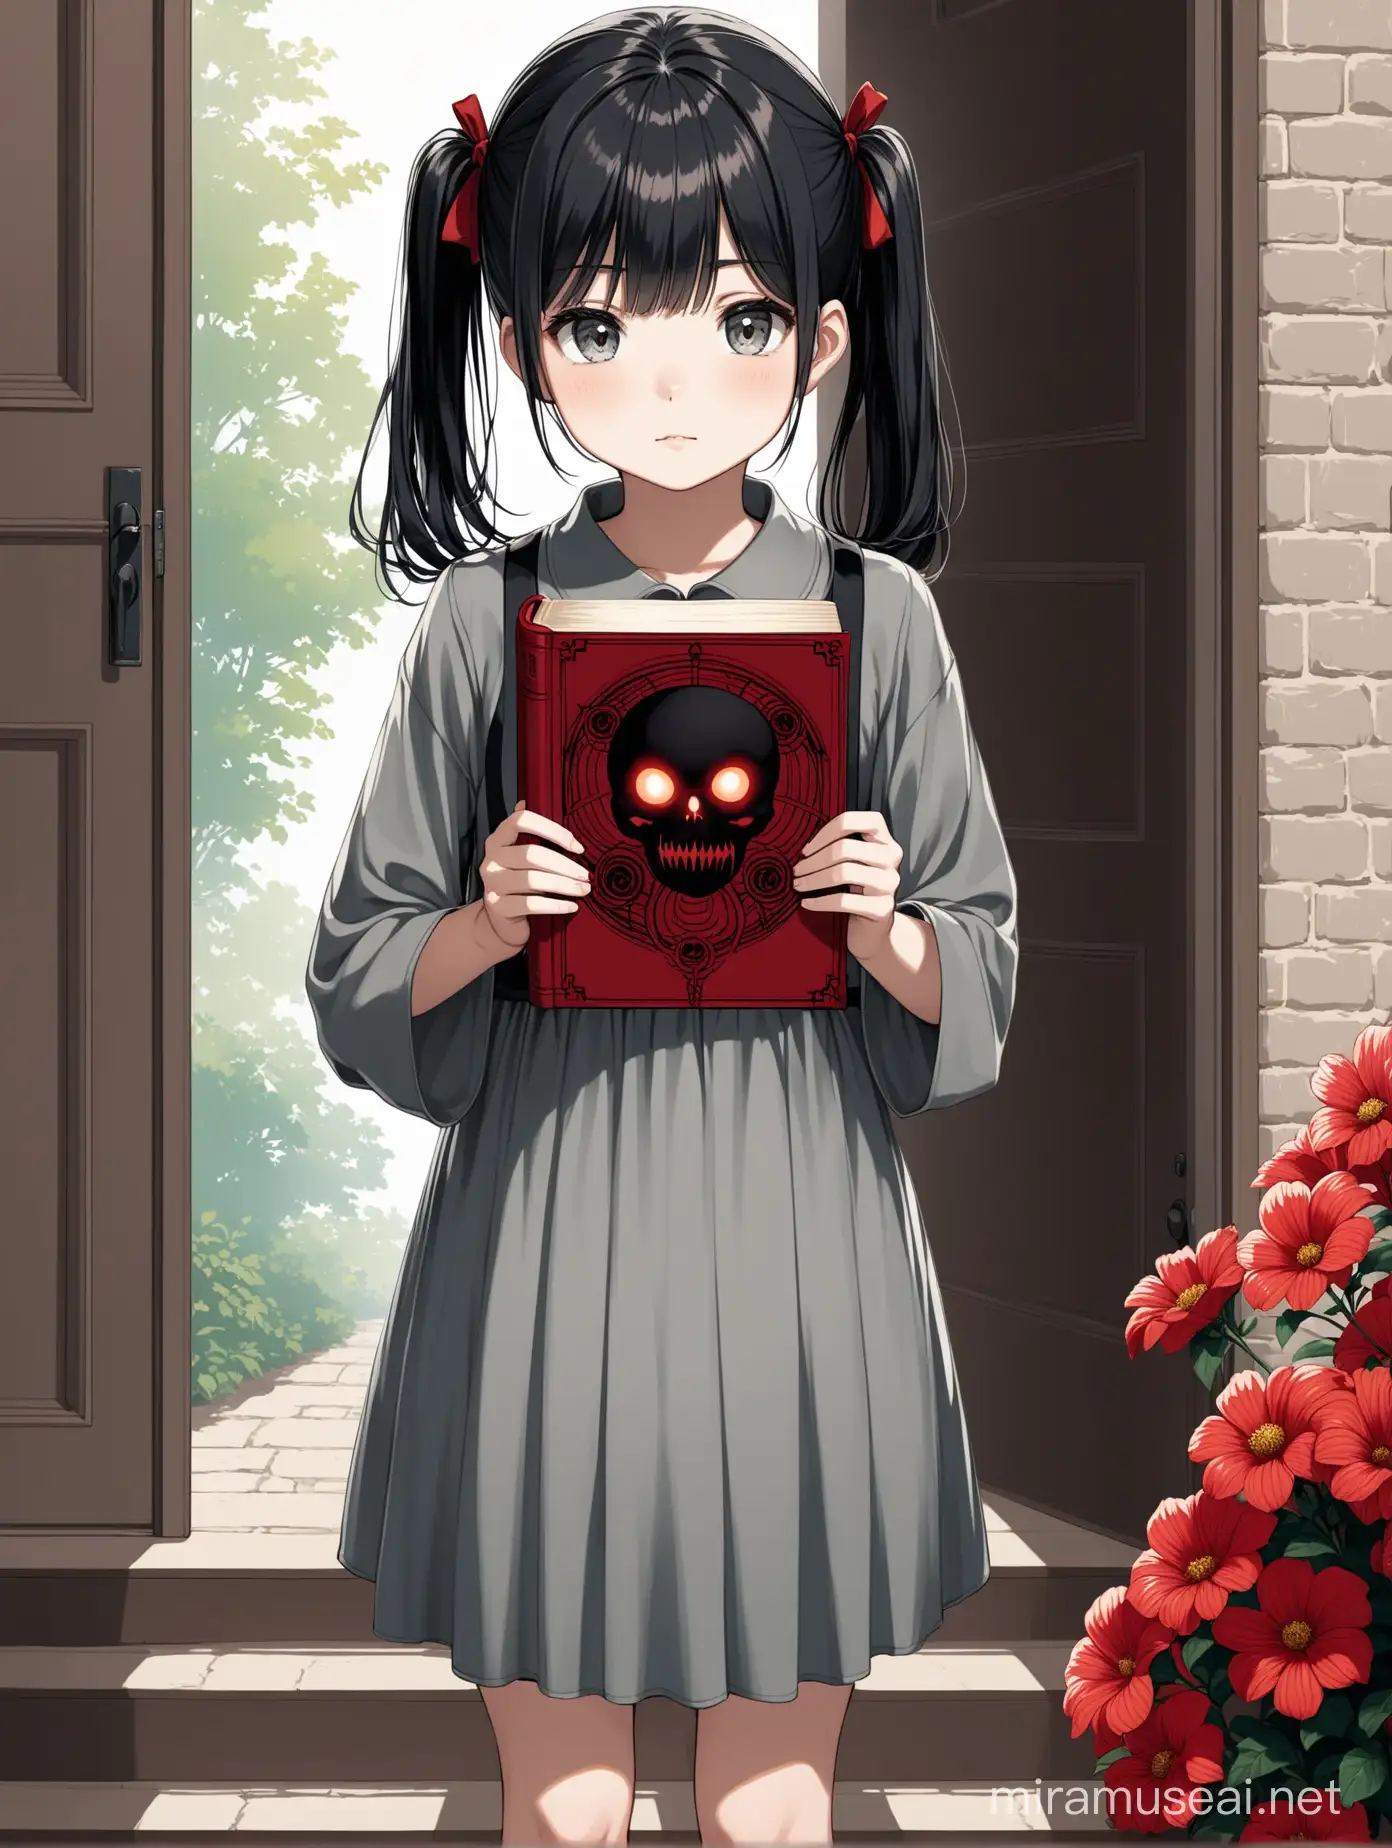 Young Girl with Necronomicon Book and Red Flower Hairpin